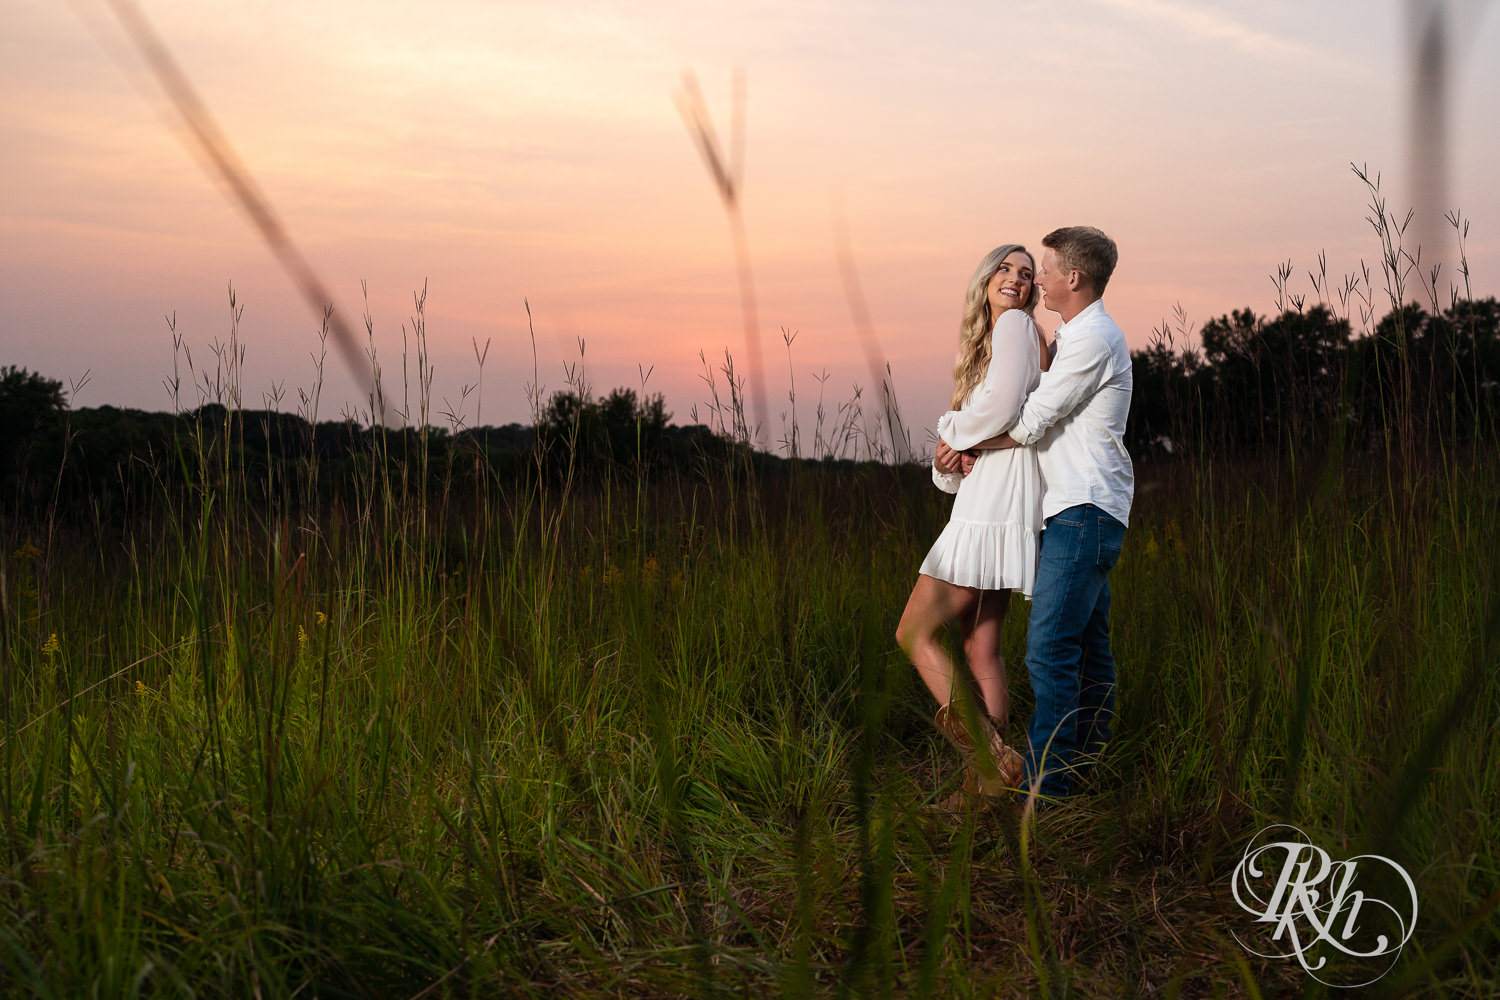 Man and woman in white and cowboy boots smile in a field at sunset at Lebanon Hills Regional Park in Eagan, Minnesota.